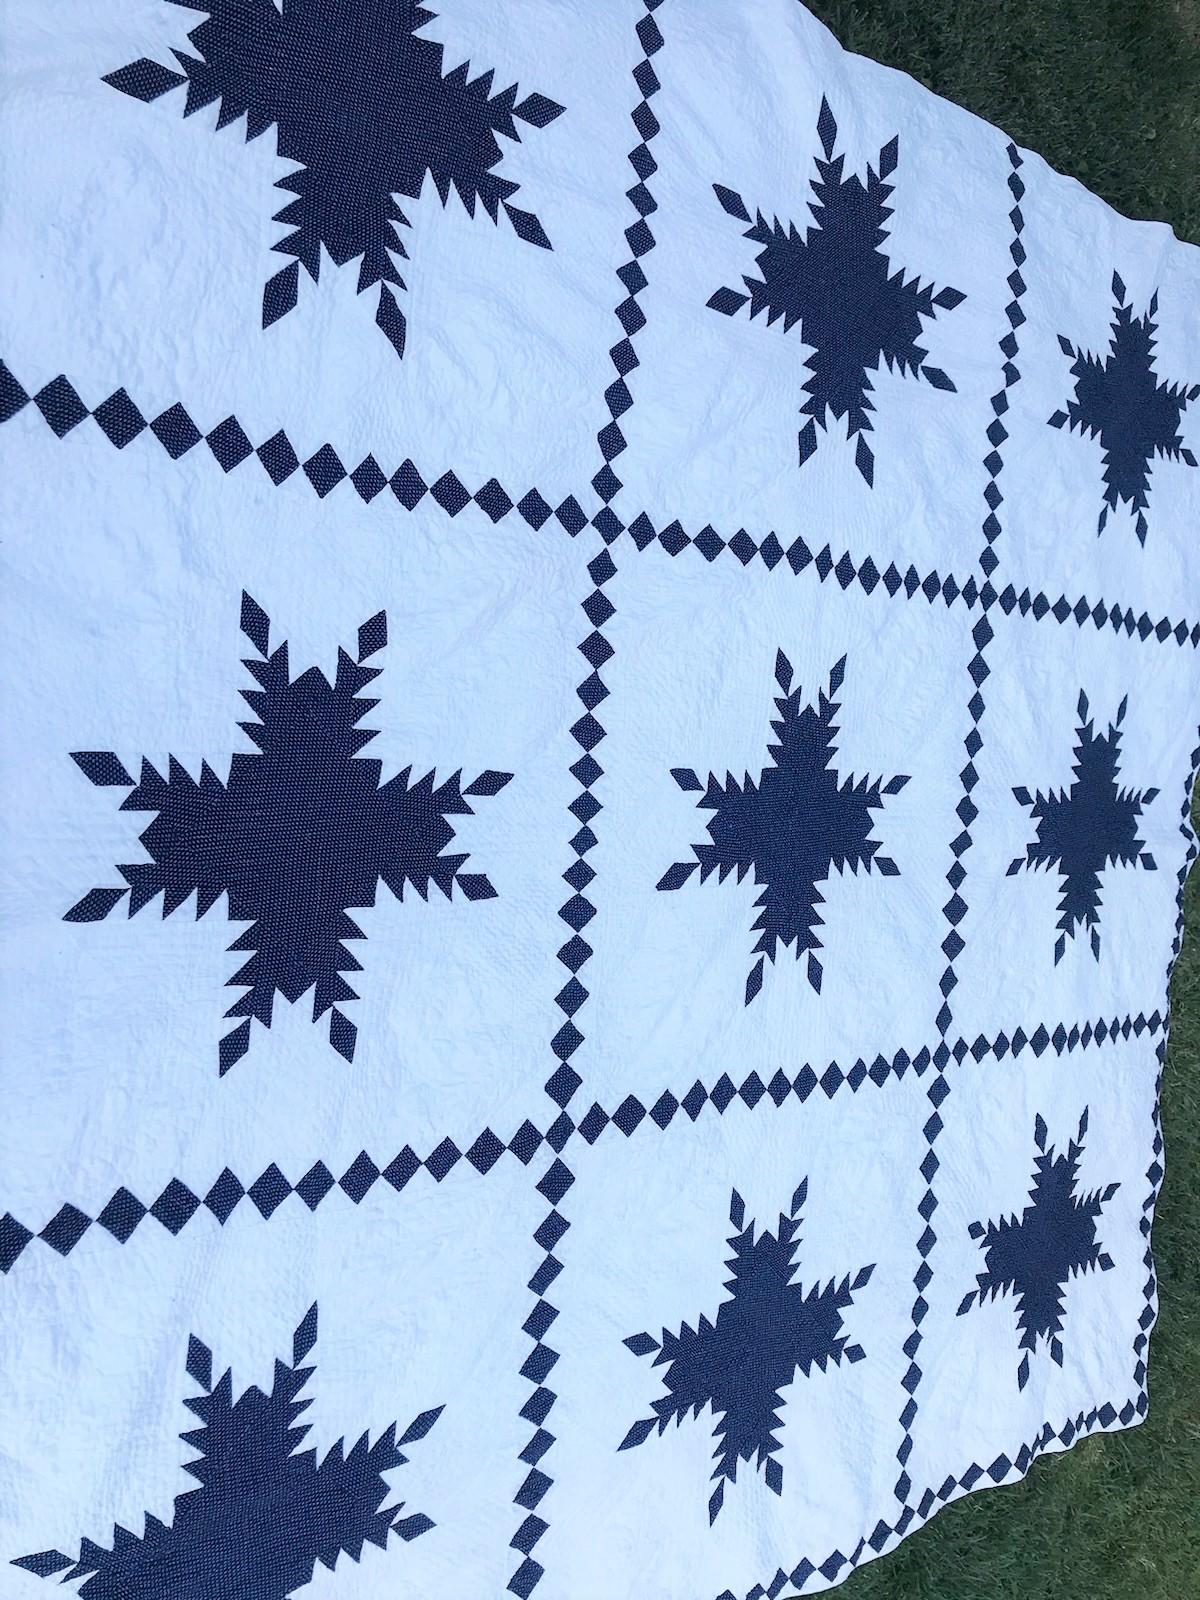 19th century blue and white feathered star quilt with amazing quilting and piecework. This border is amazing and in very good condition.